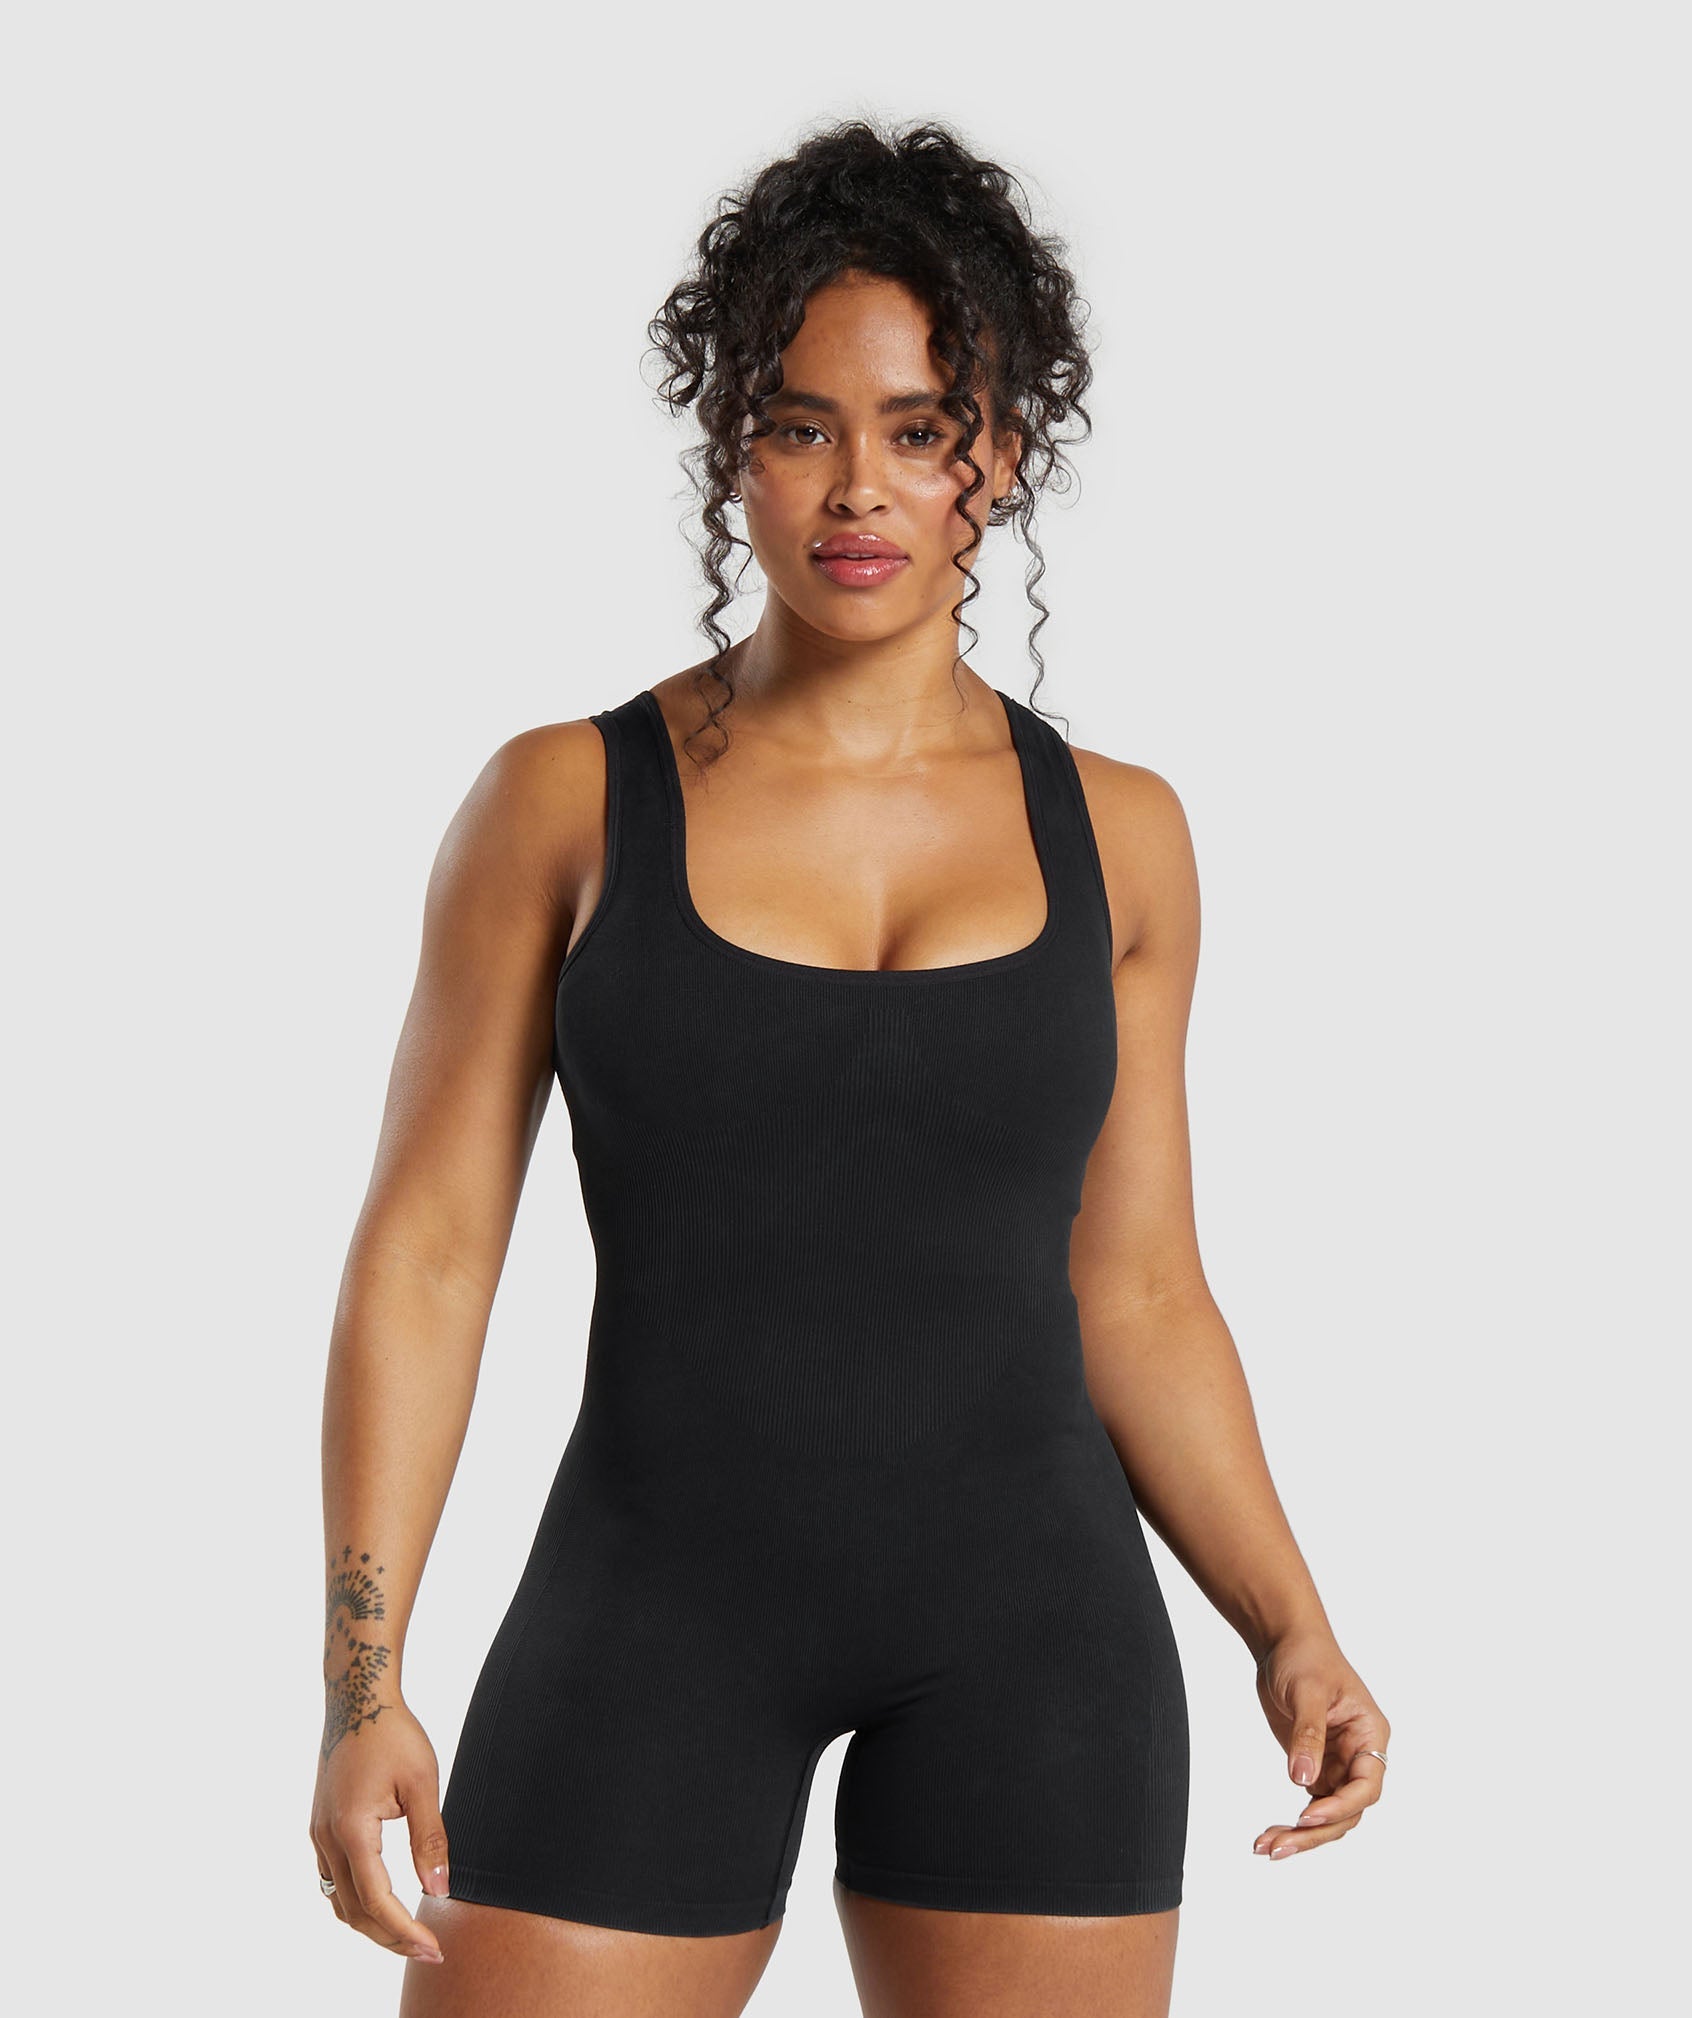 Gains Seamless All-In-One in Black - view 1